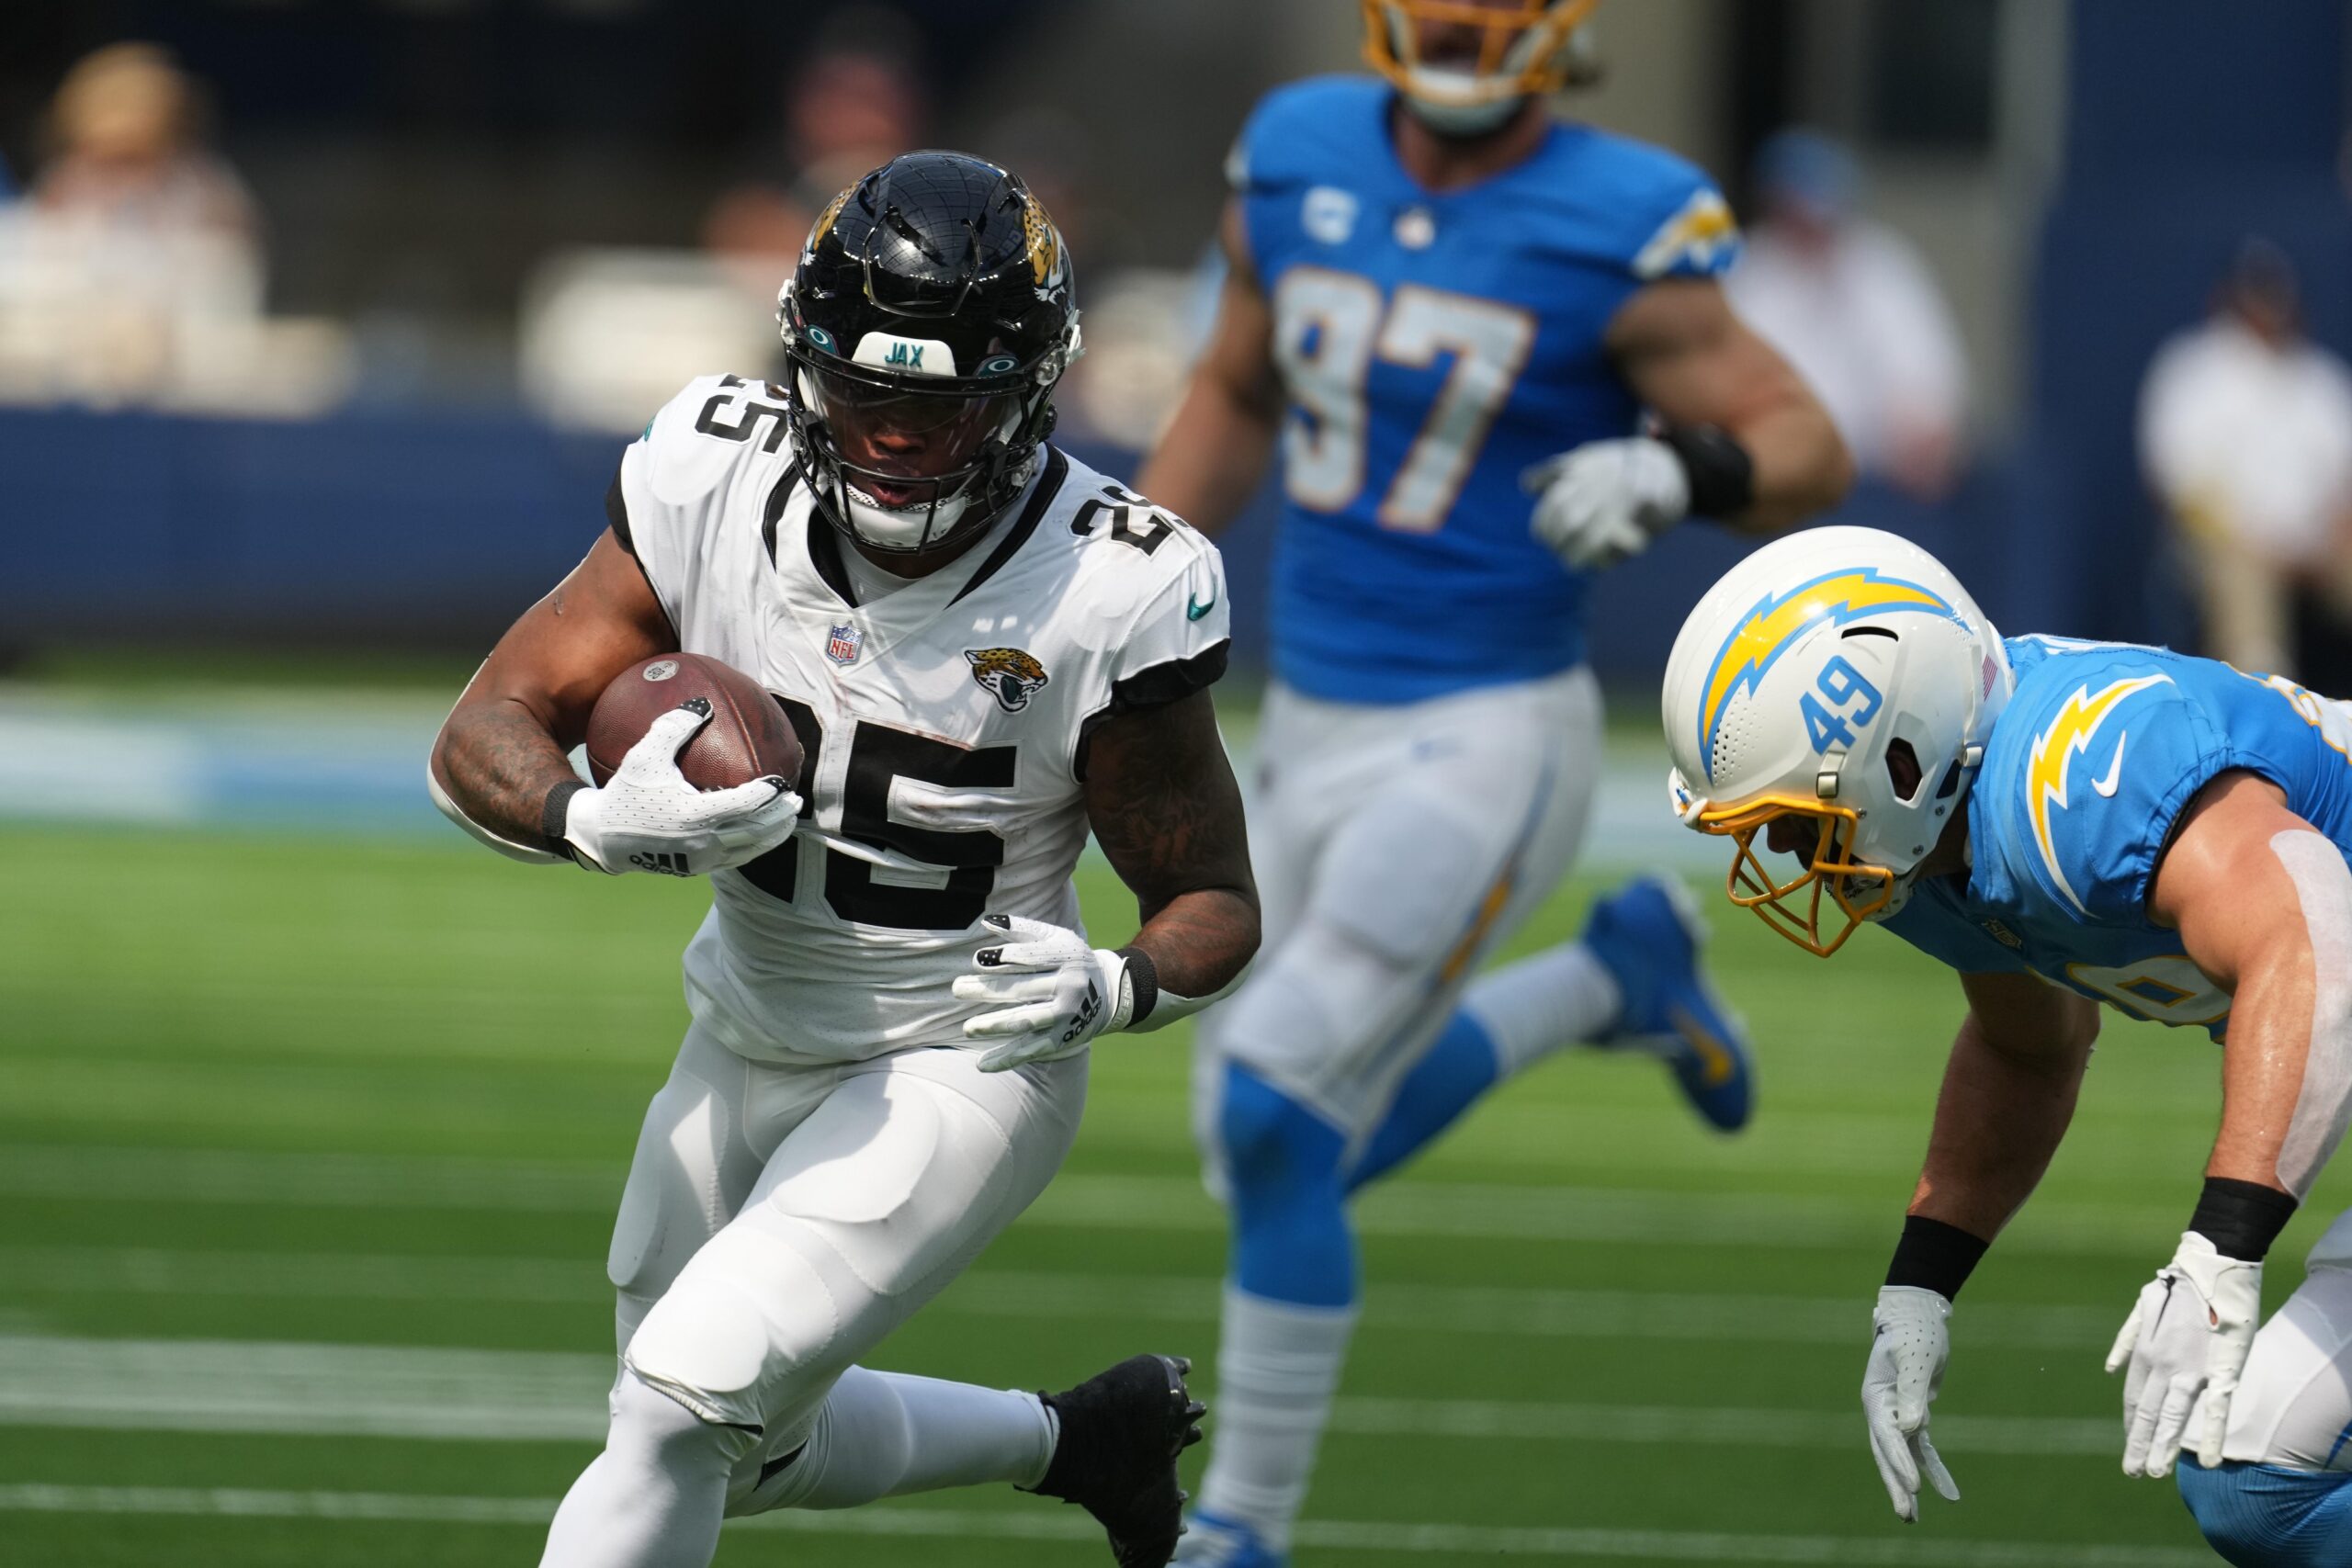 Early Week 8 Bargain DFS Targets Factor in Personnel Shifts